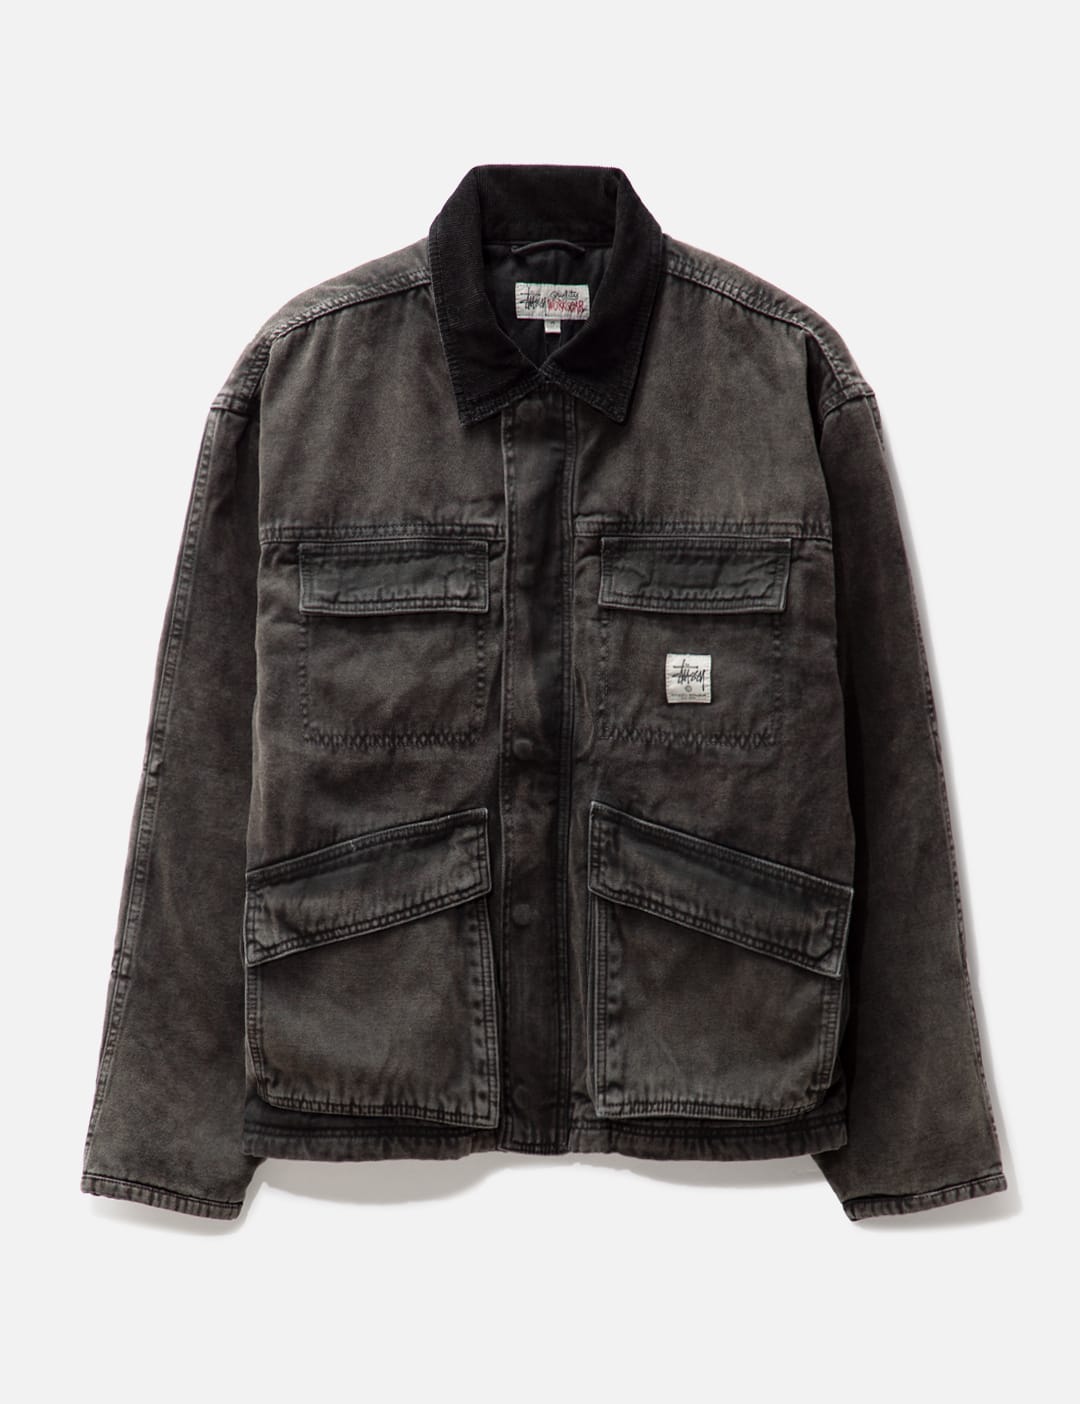 Stüssy - Washed Canvas Shop Jacket | HBX - Globally Curated